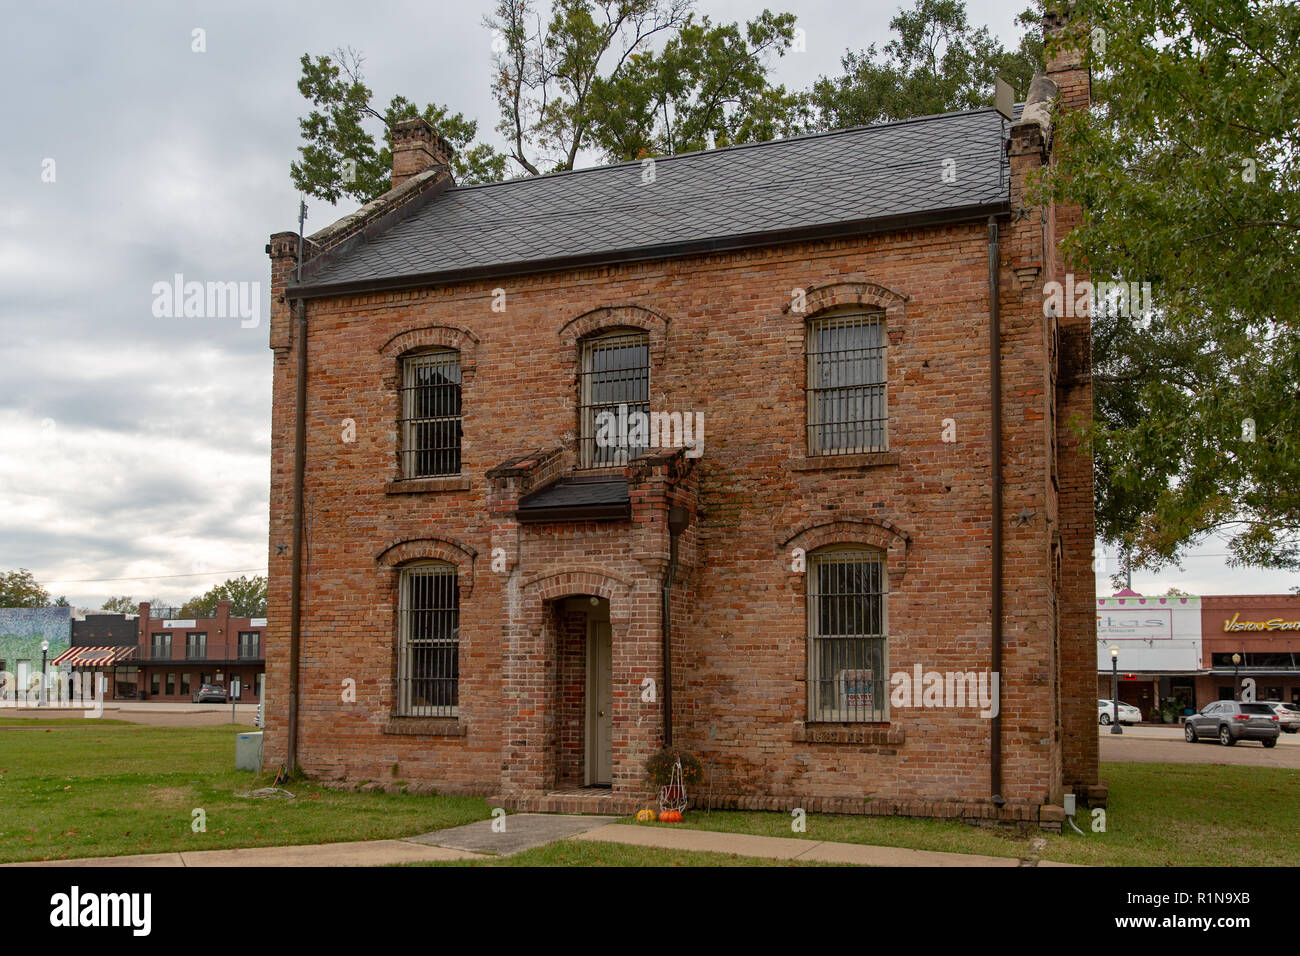 Historic Shelby County jail in Center Texas Stock Photo